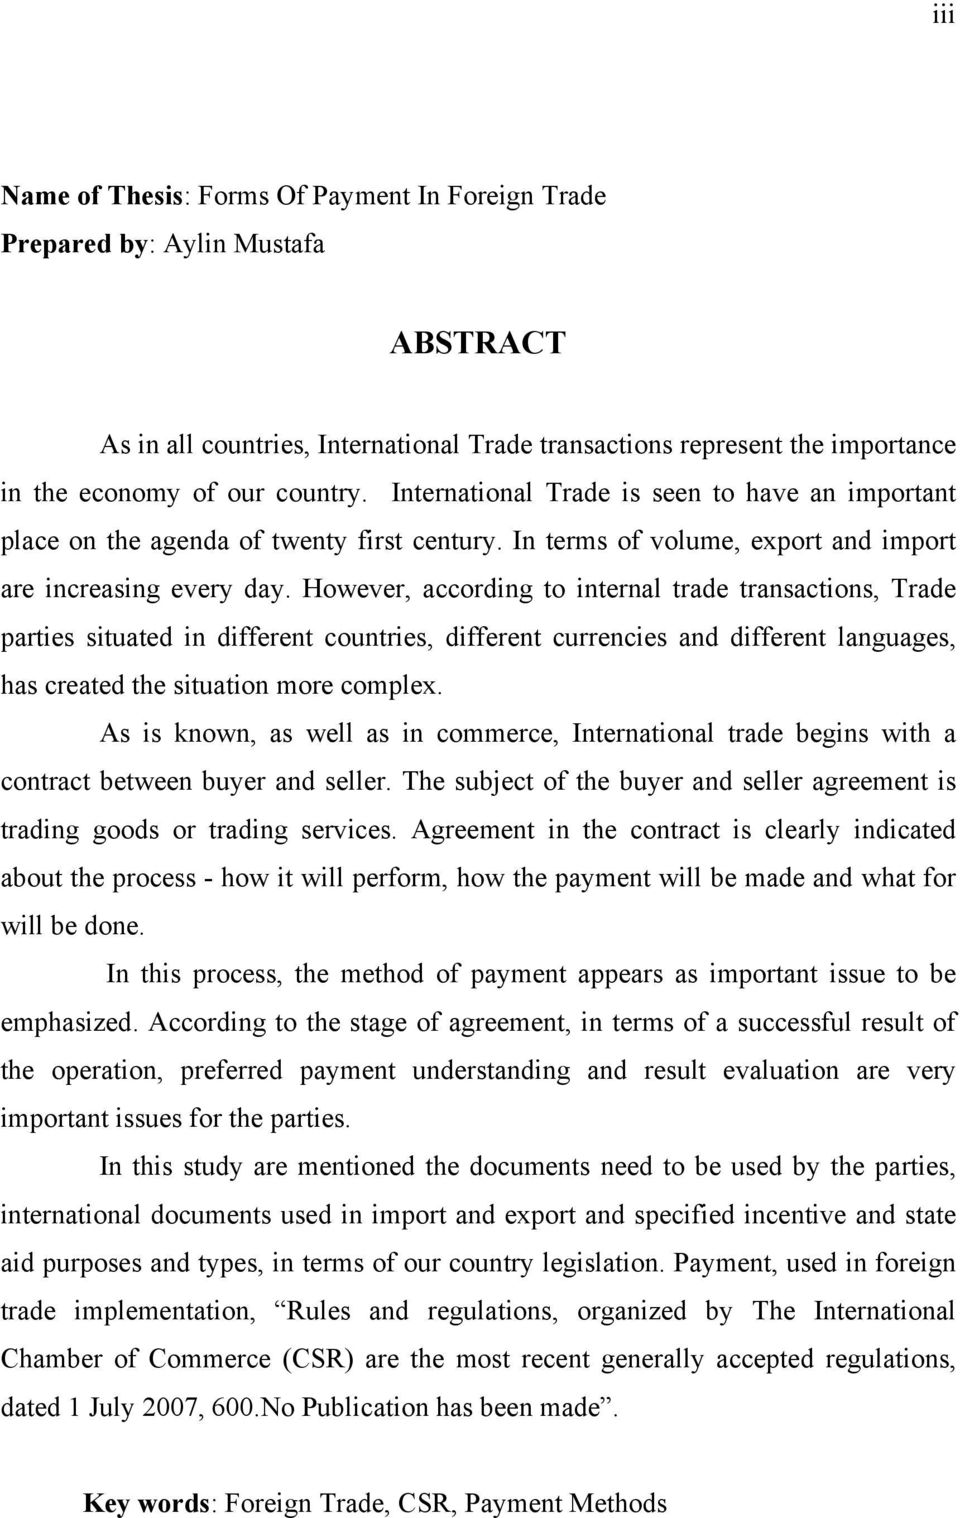 However, according to internal trade transactions, Trade parties situated in different countries, different currencies and different languages, has created the situation more complex.